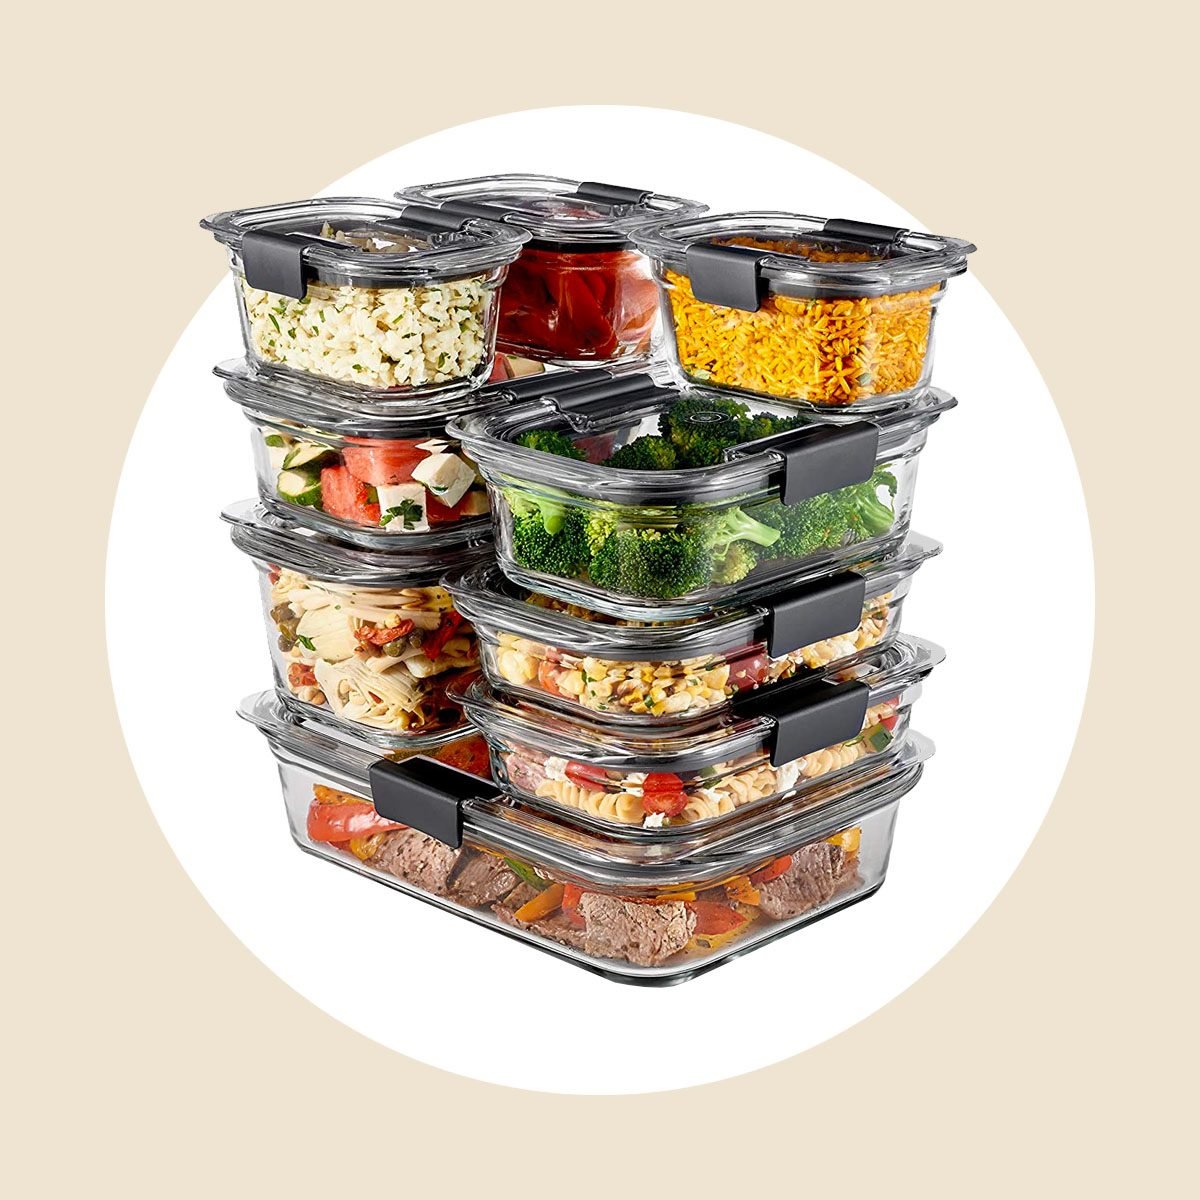 Glass Meal Prep, Food Storage Containers, with Sustainable Bamboo Lids, Food Dividers Separators